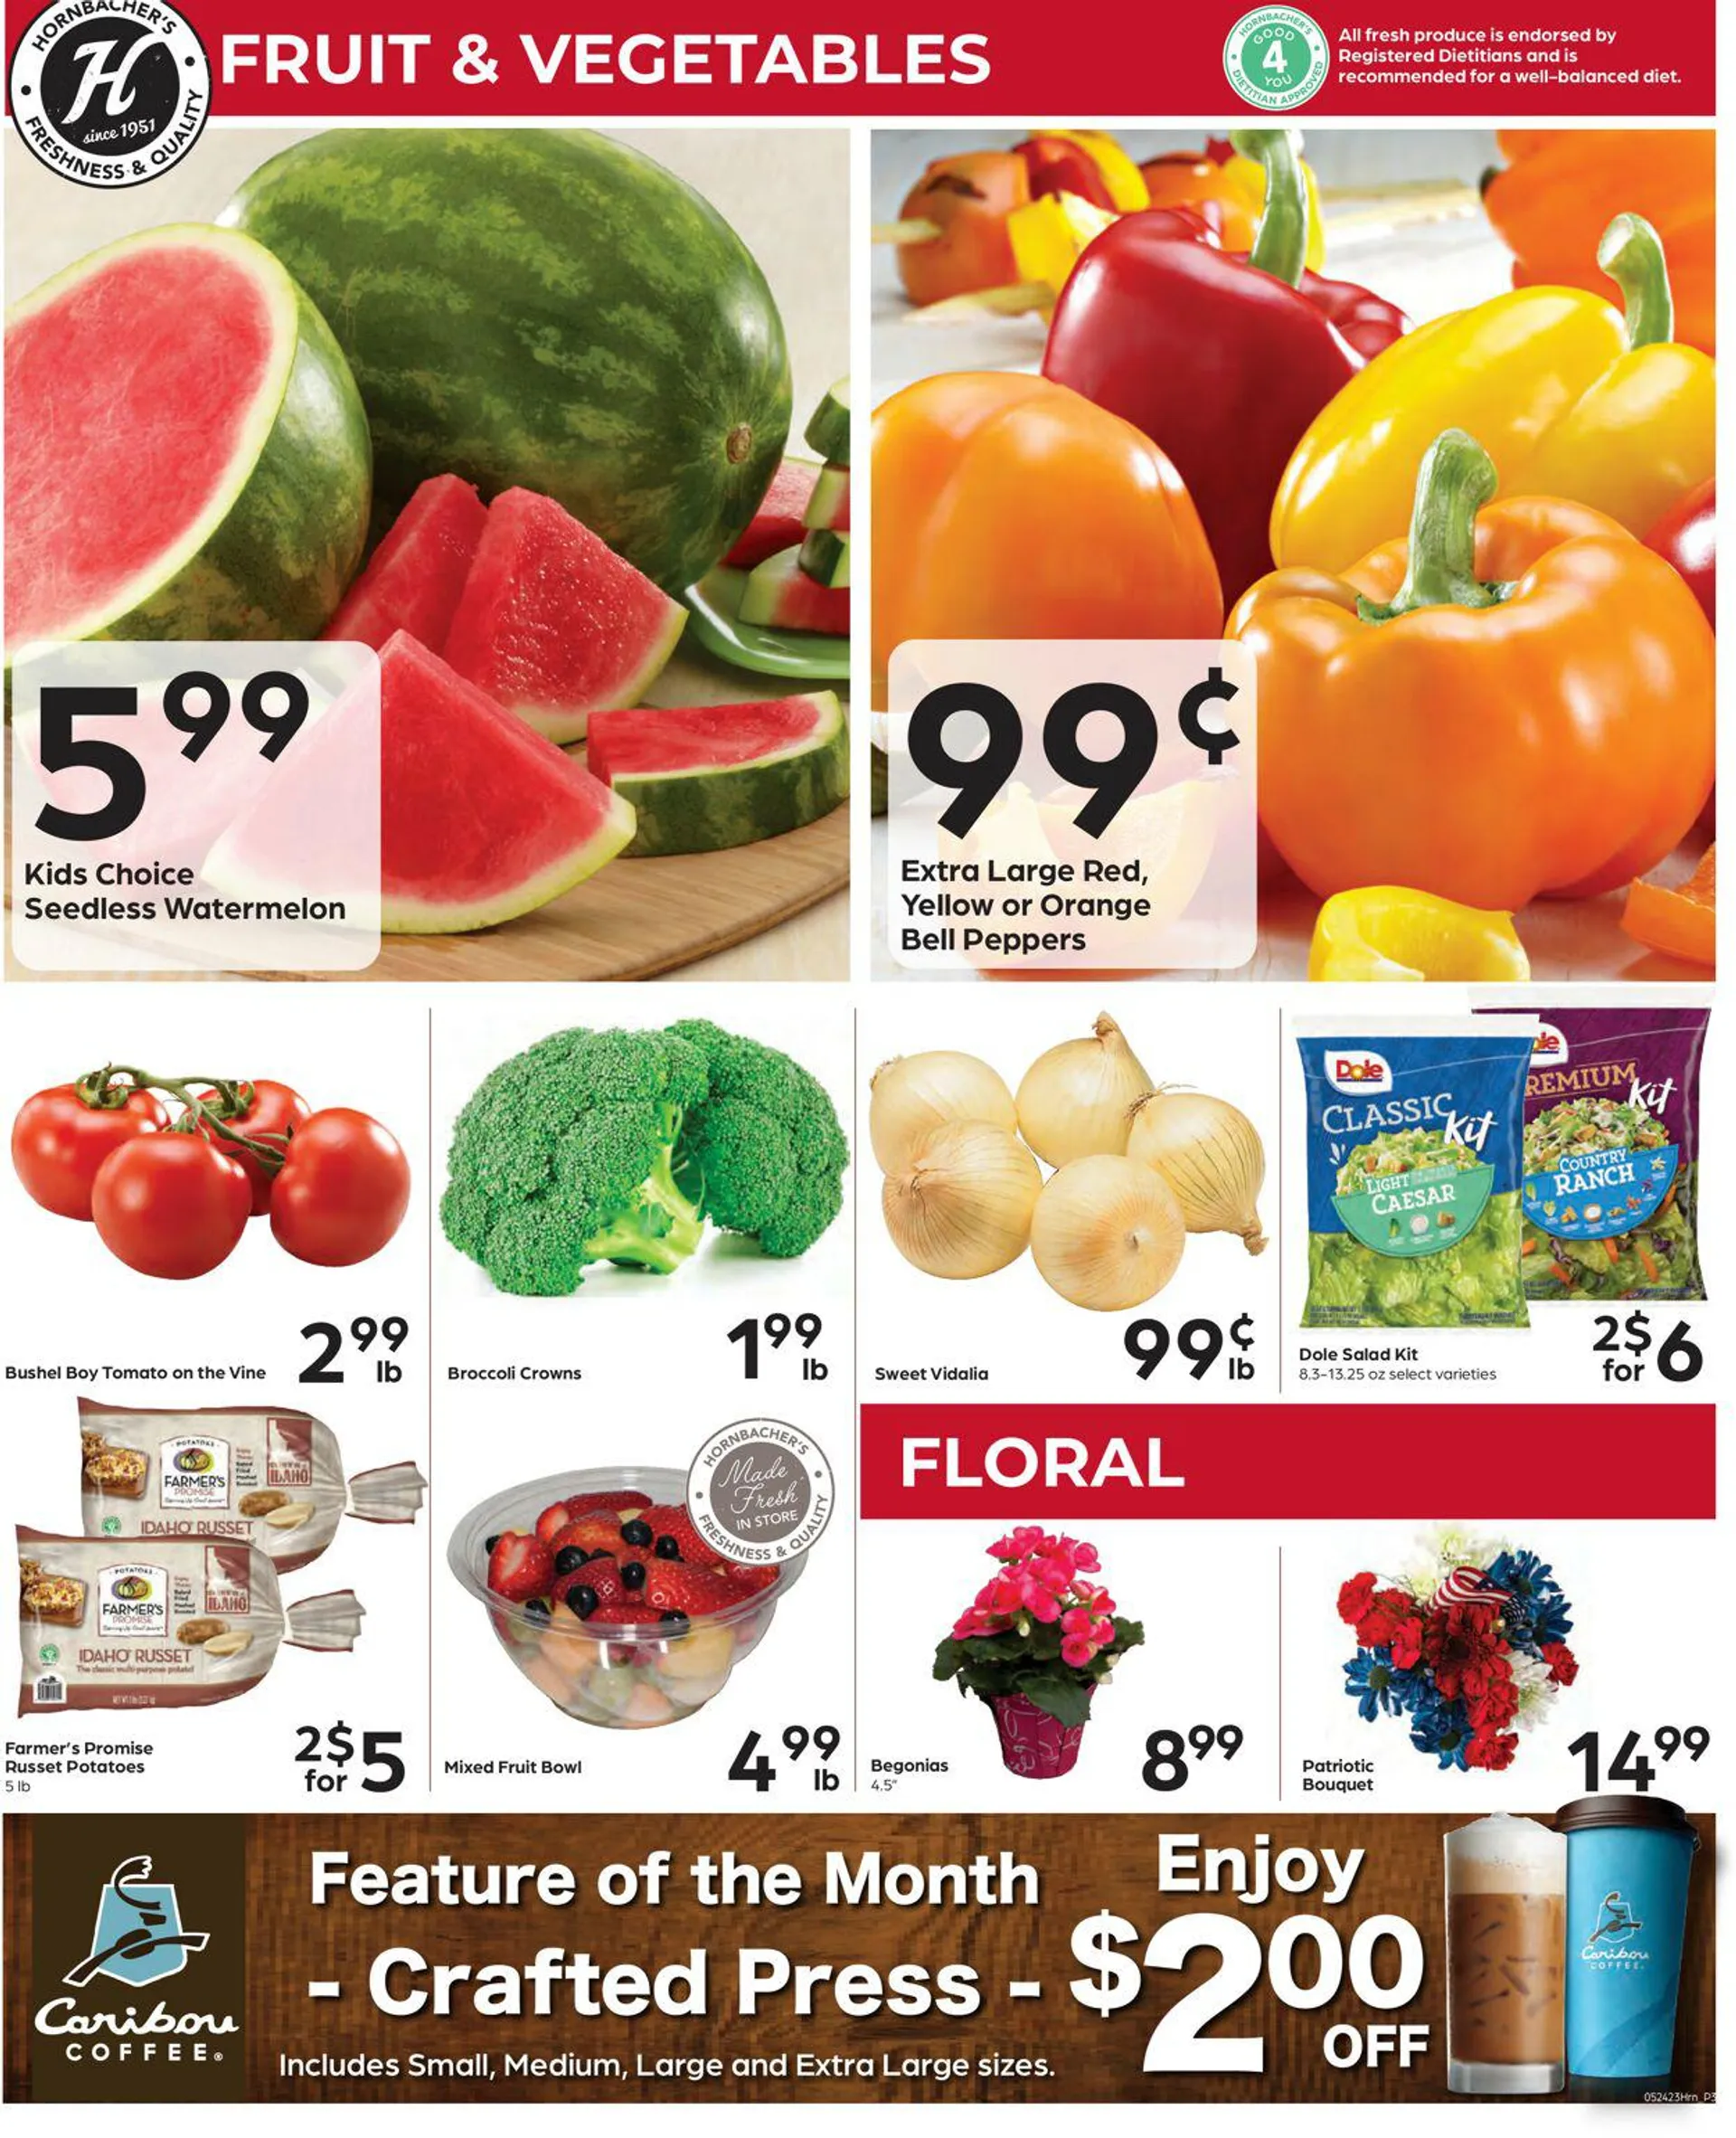 Hornbachers Current weekly ad - 3